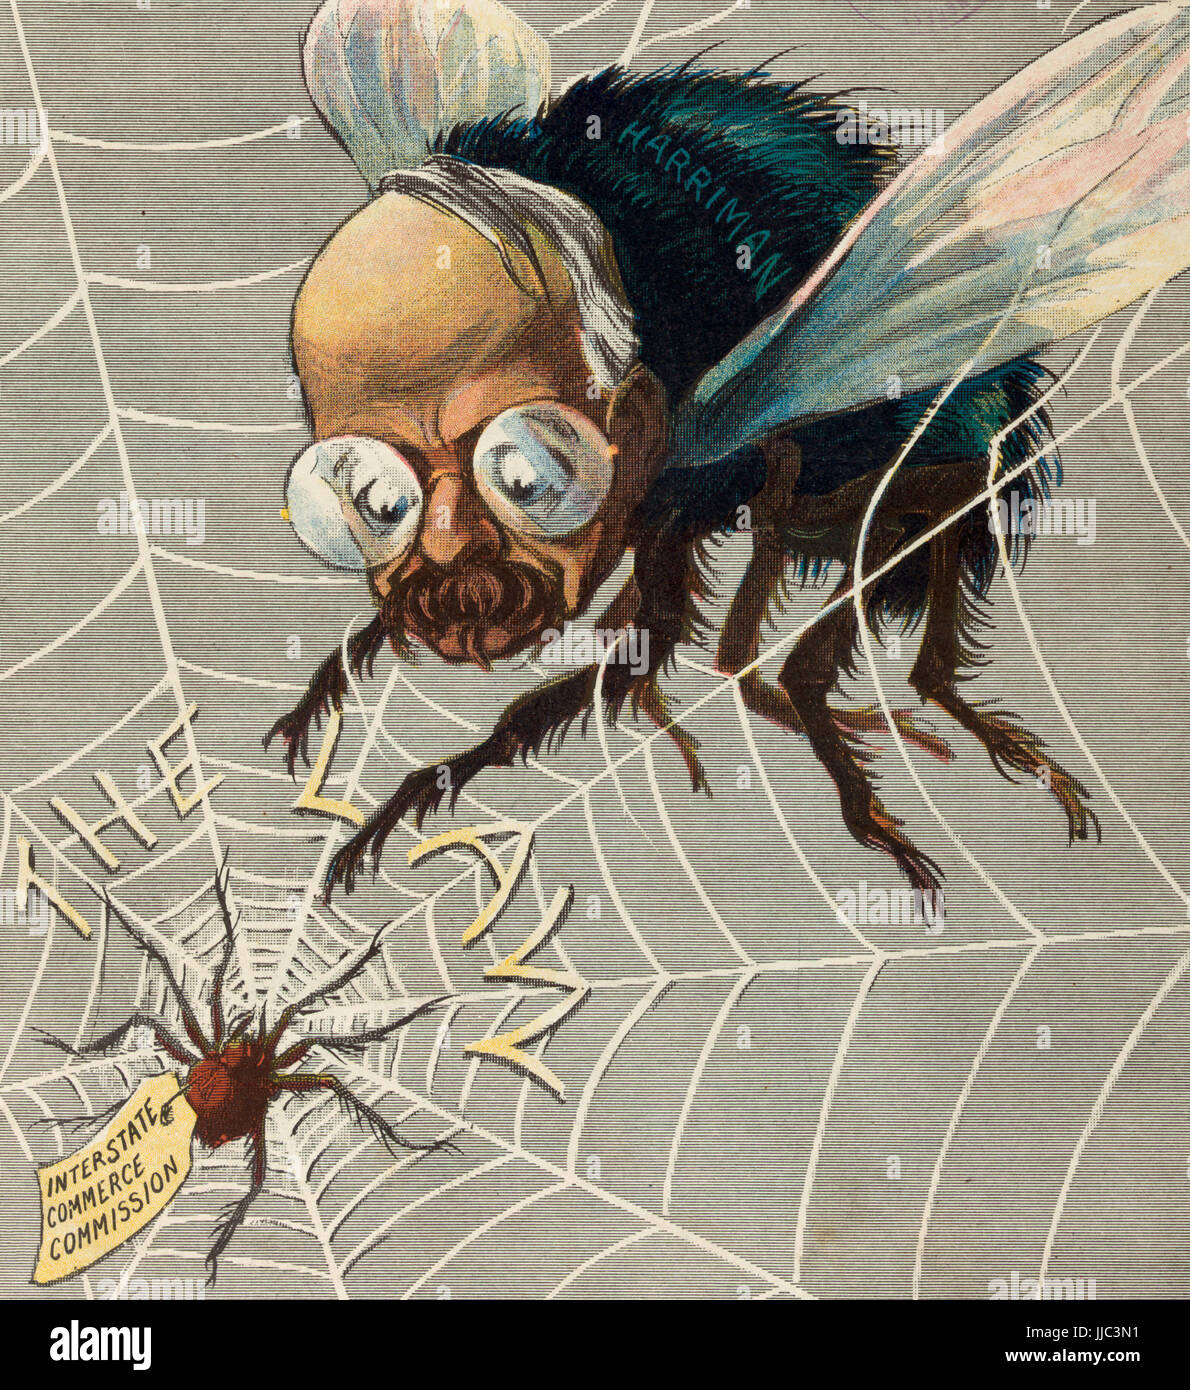 Will you walk into my Parlor, said the spider to the fly - Illustration shows a spider labeled 'Interstate Commerce Commission' on a its web labeled 'The Law' and a large fly labeled 'Harriman' that is caught in the web. Political cartoon, circa 1907 Stock Photo